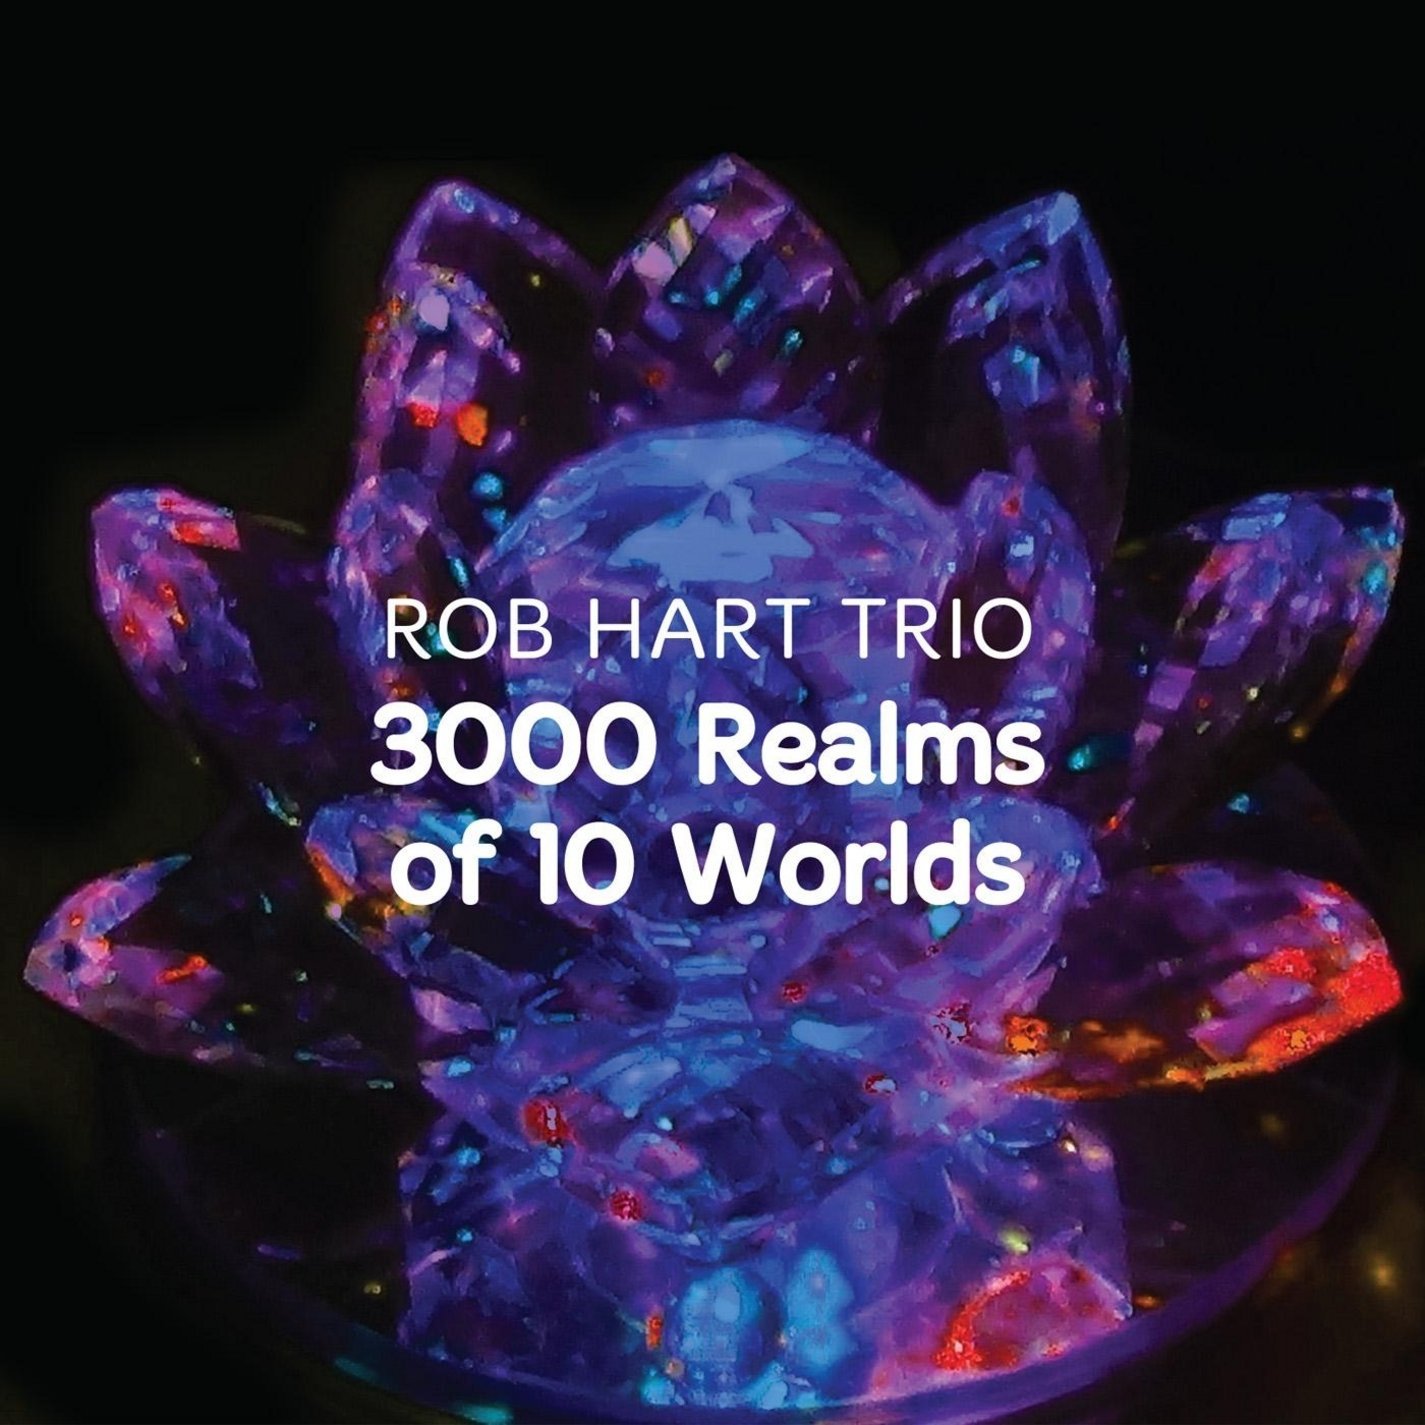 Rob Hart Trio — 3000 Realms of 10 Worlds